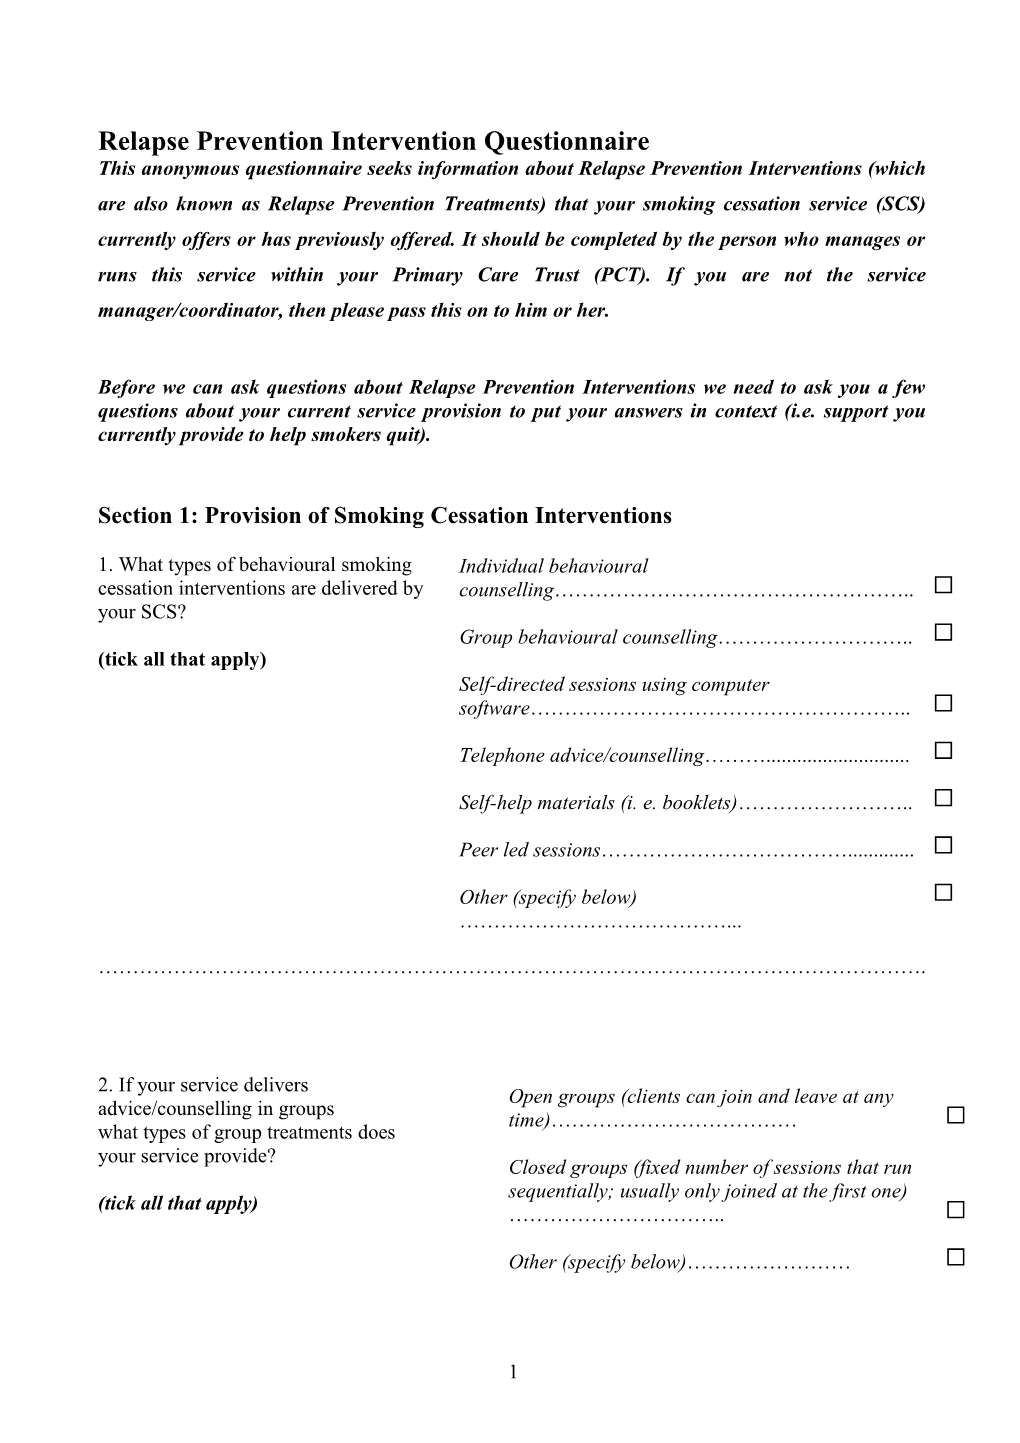 Relapse Prevention Intervention Questionnaire (Draft)